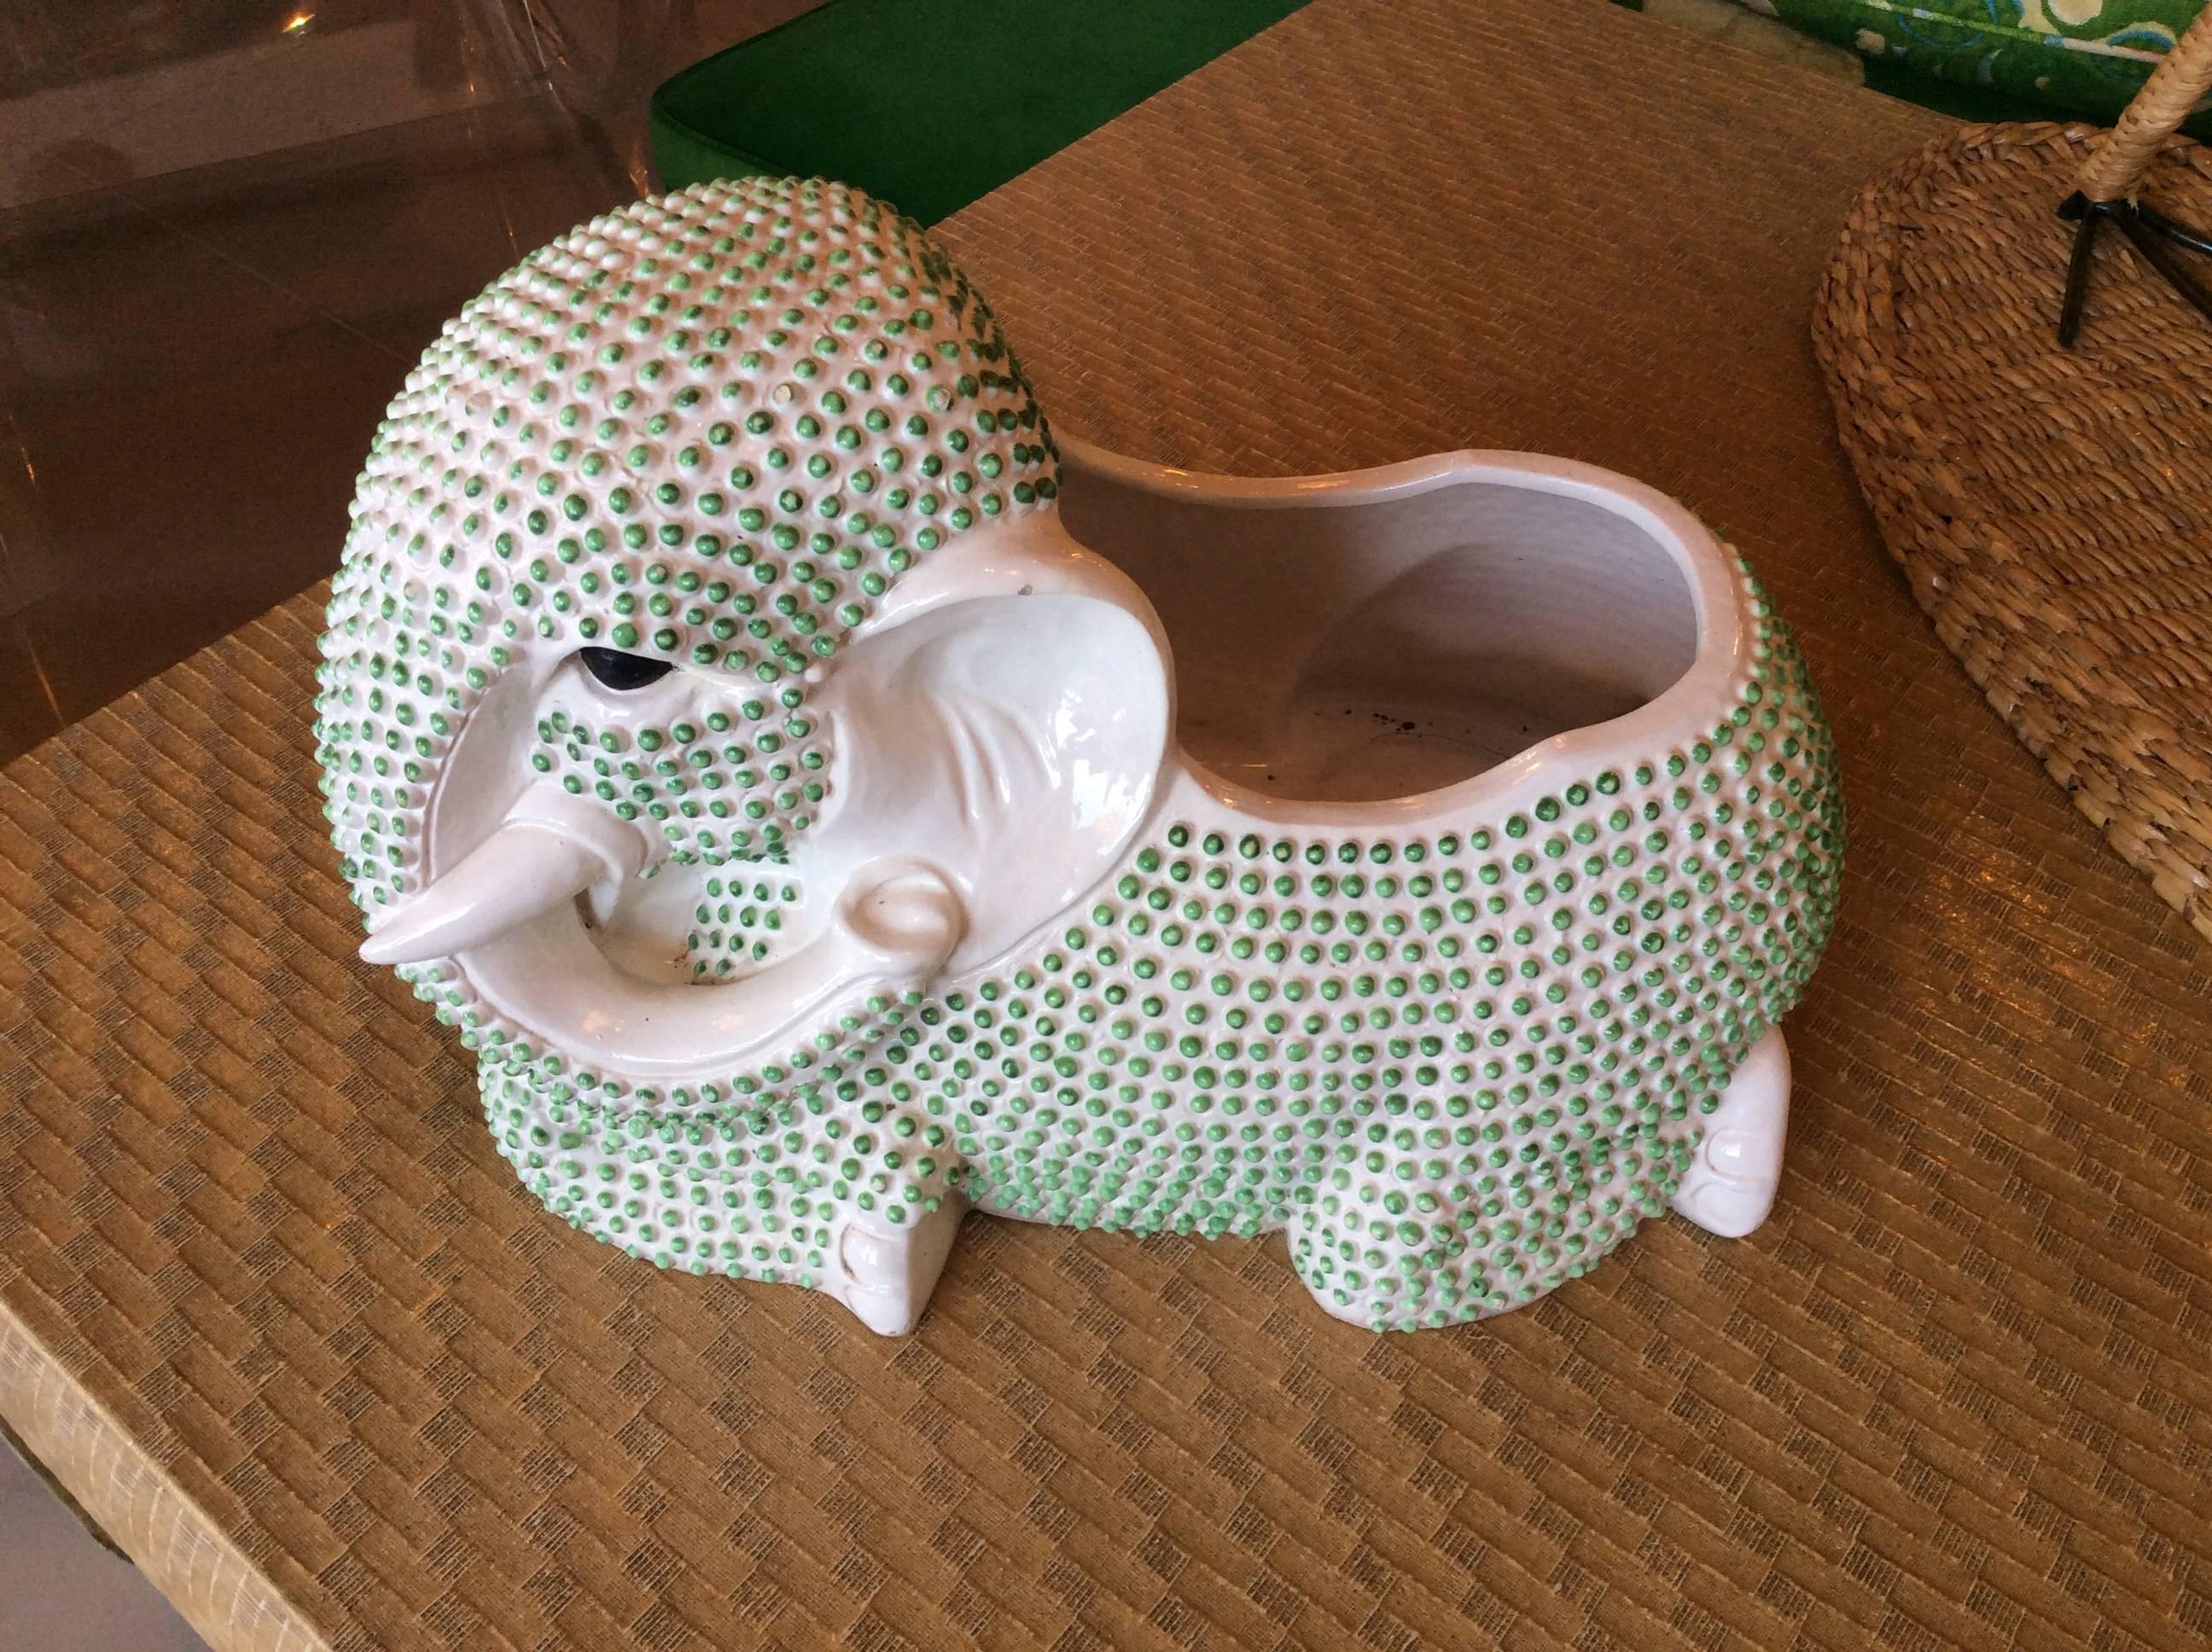 Such a cute vintage 1970s ceramic elephant planter with the best green hobnail! Perfect palm beach, Hollywood Regency piece!